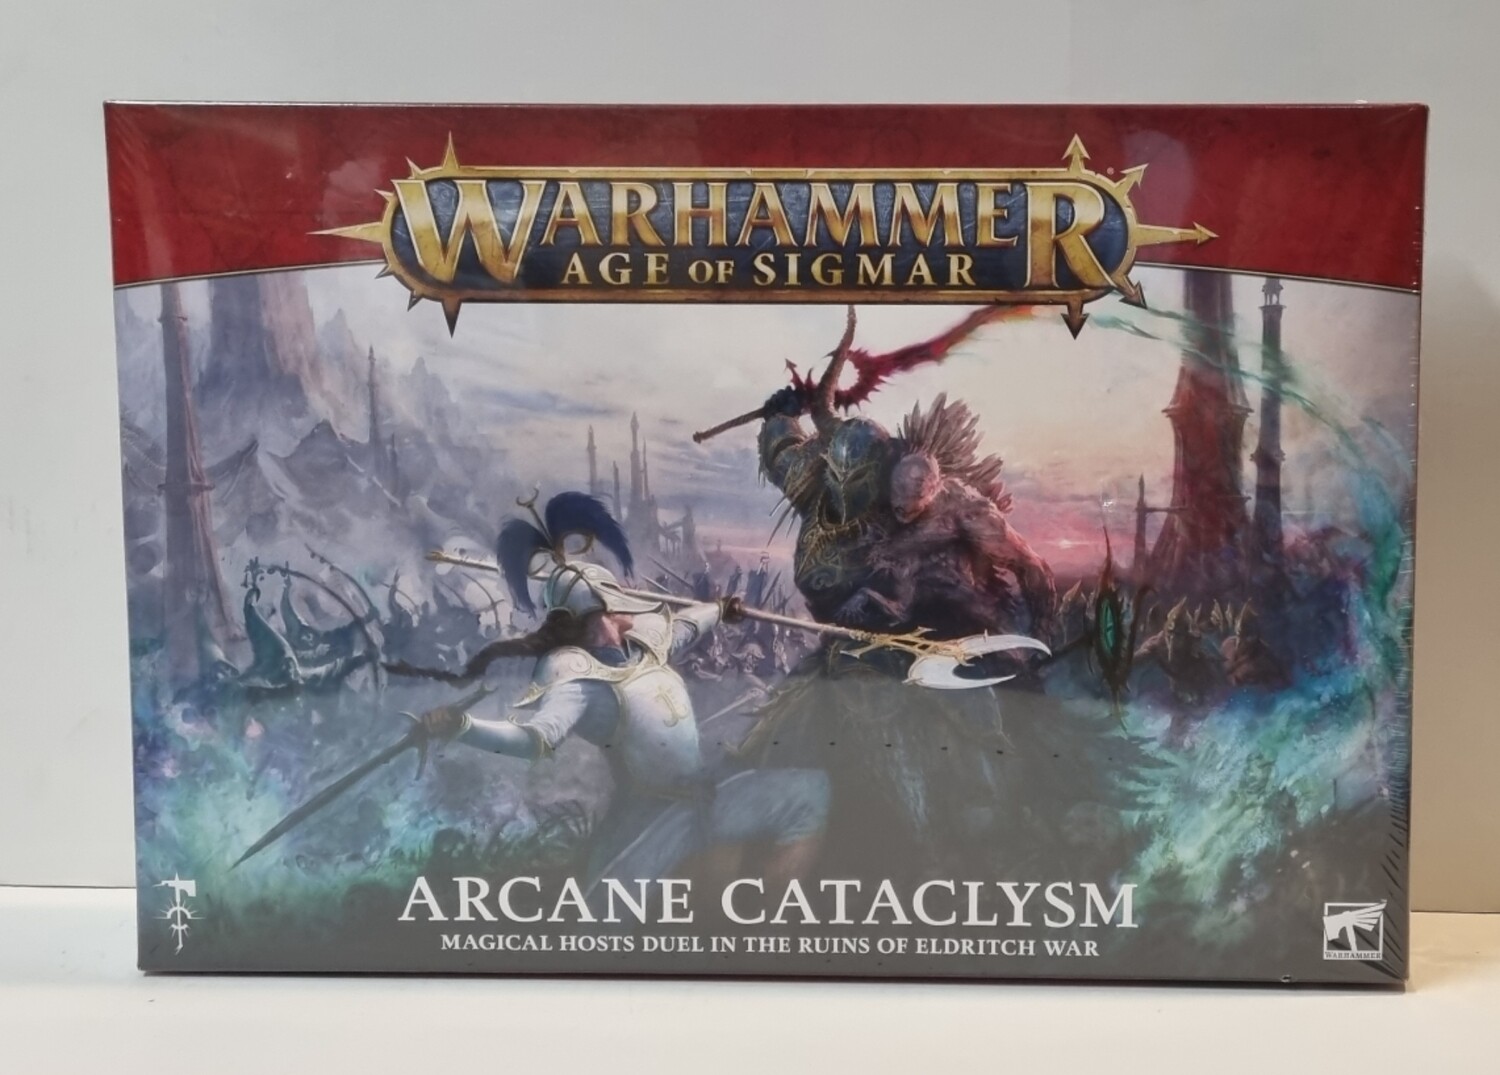 Warhammer, Age of Sigmar, 80-40, Arcane Cataclysm: Magical hosts Duel in the Ruins of Eldritch War